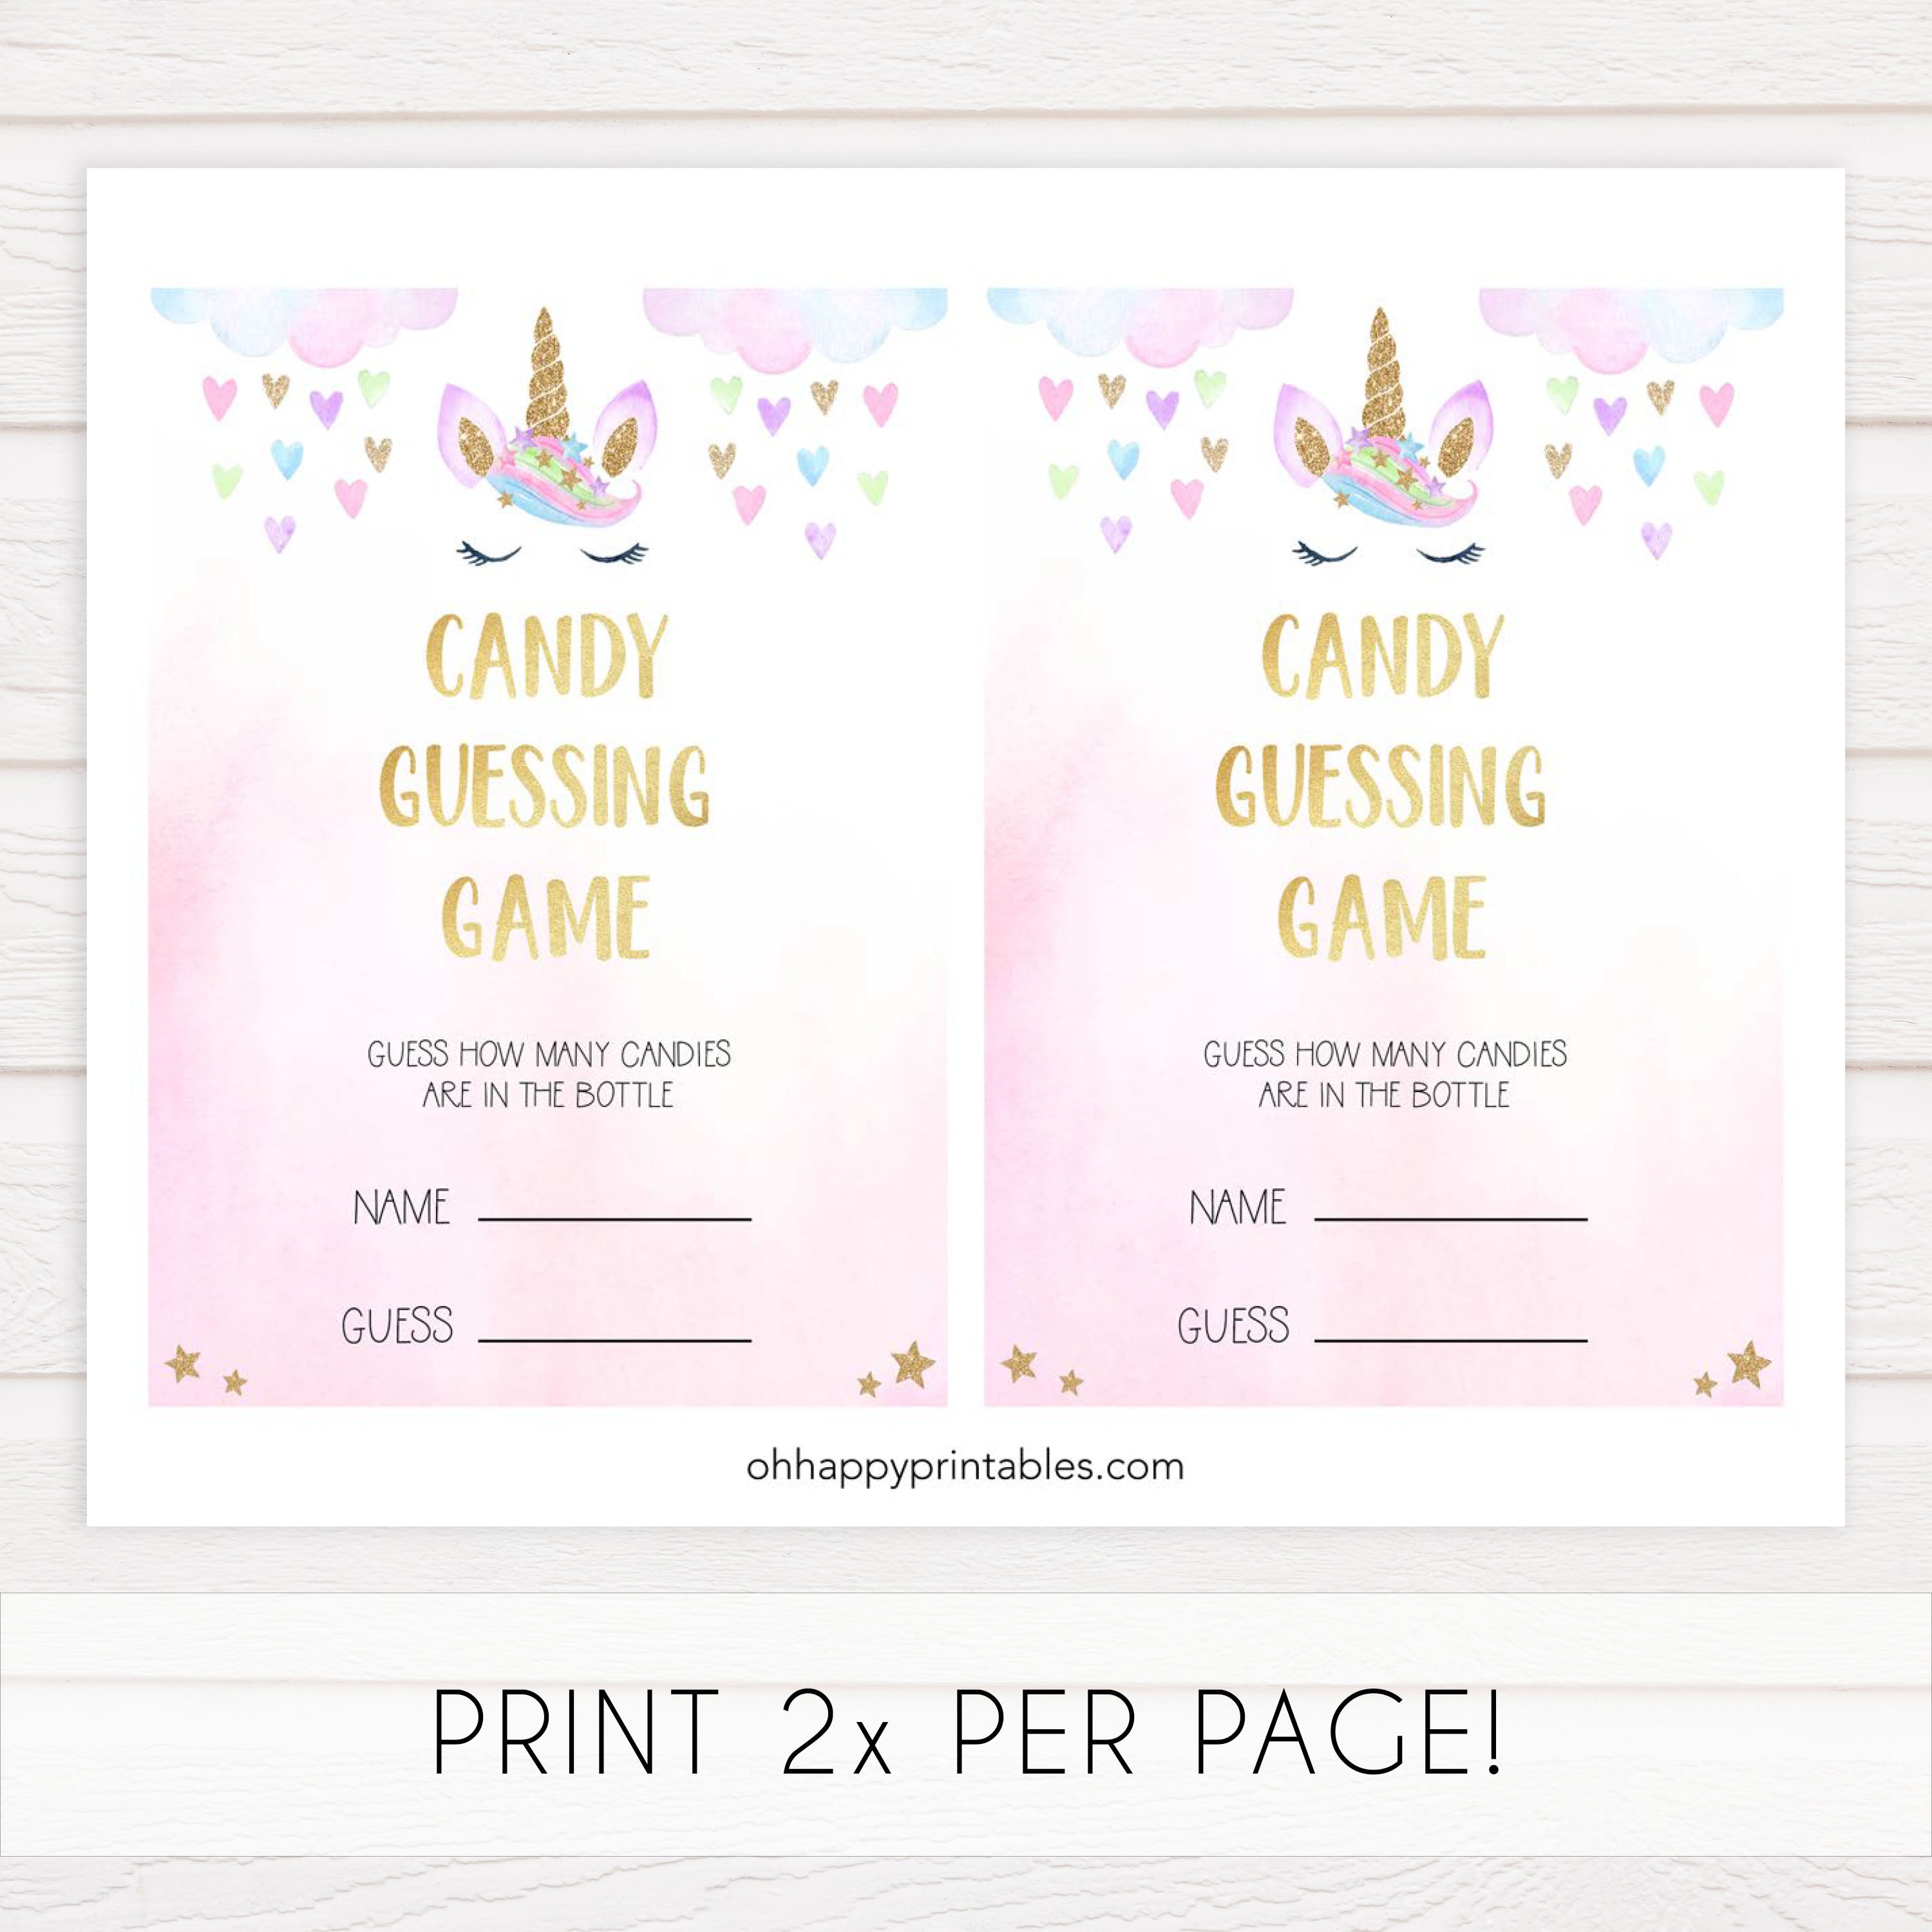 candy guessing game, Printable baby shower games, unicorn baby games, baby shower games, fun baby shower ideas, top baby shower ideas, unicorn baby shower, baby shower games, fun unicorn baby shower ideas